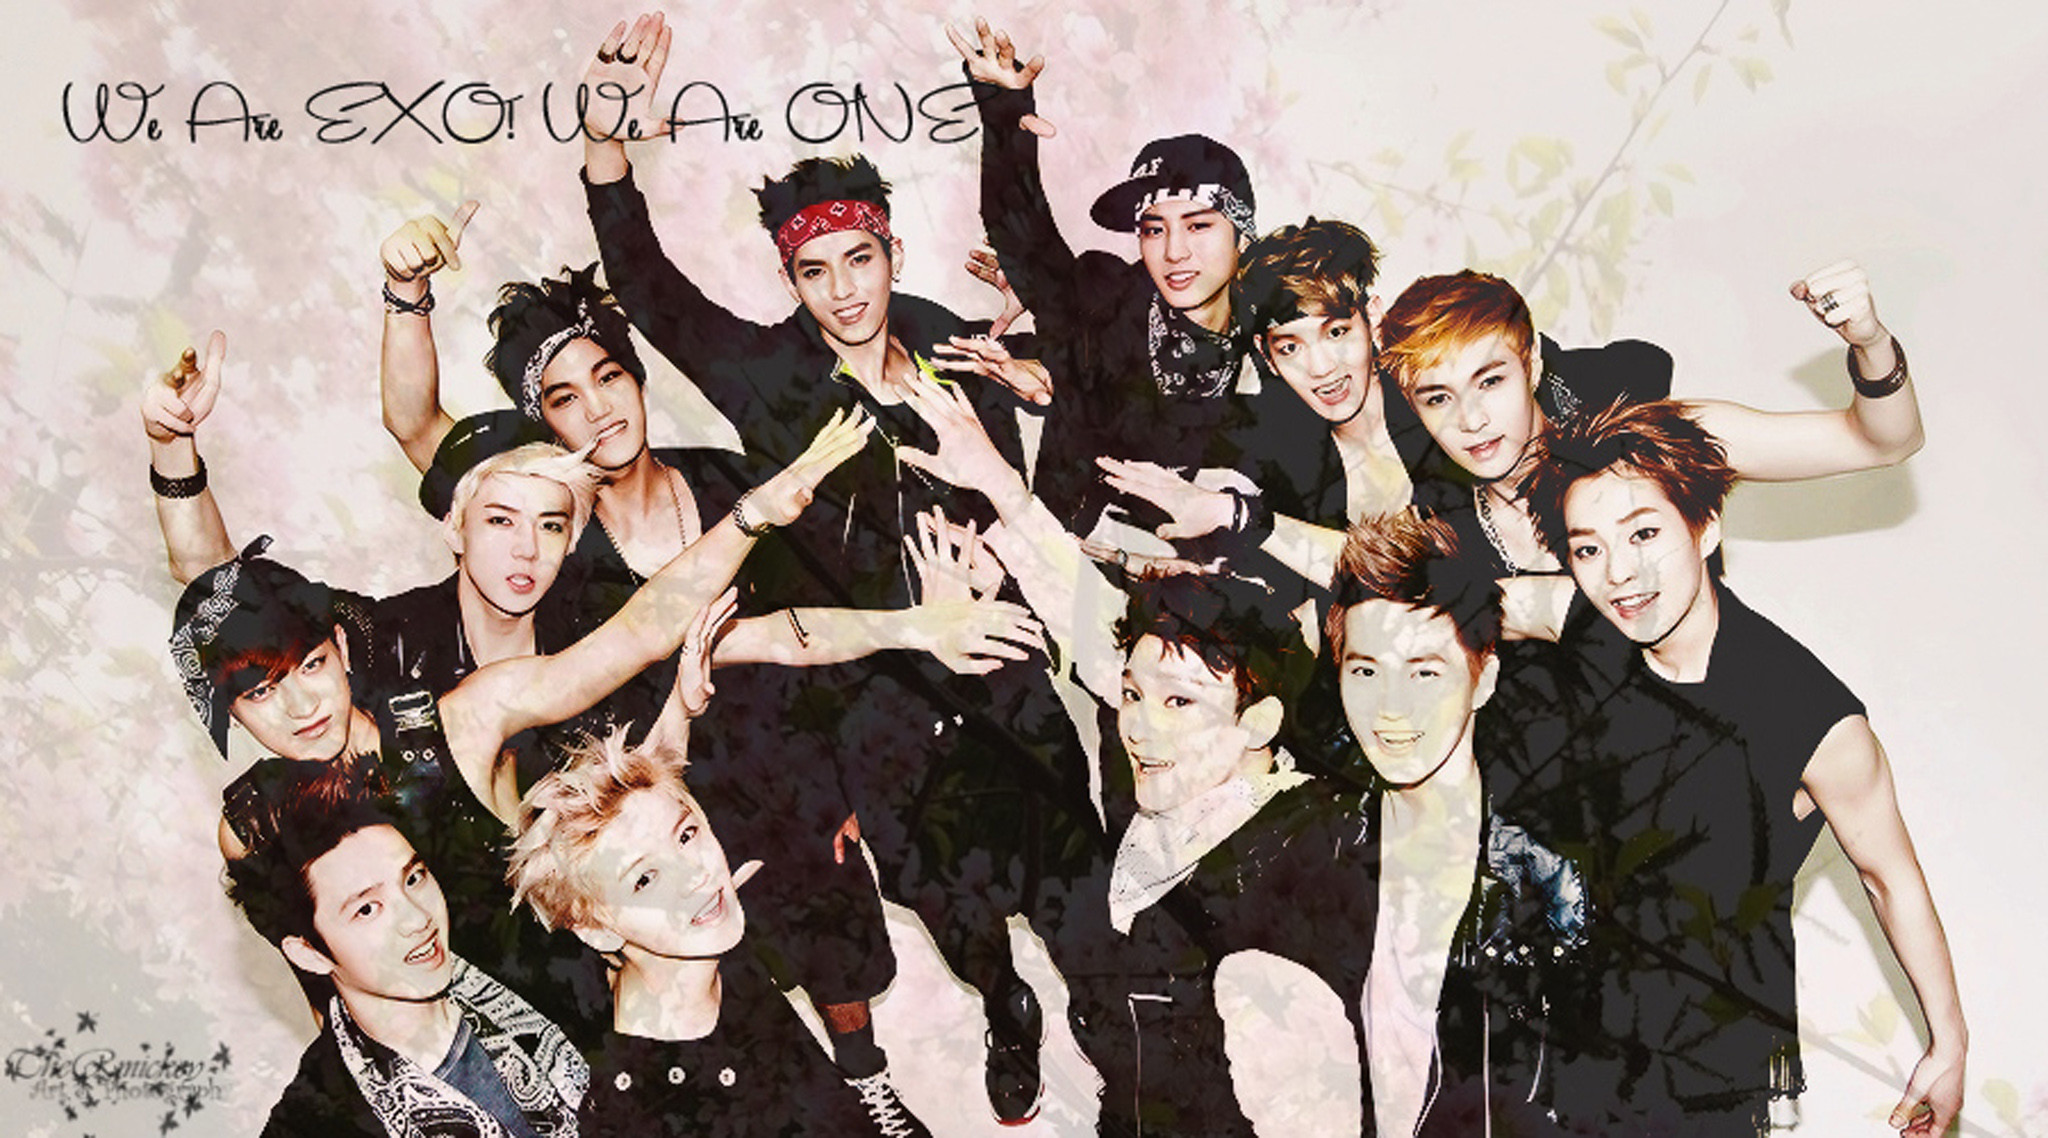 2048x1138, We Are Exo By The Rmickey 
 Data Id 51907 - Exo We Are One - HD Wallpaper 